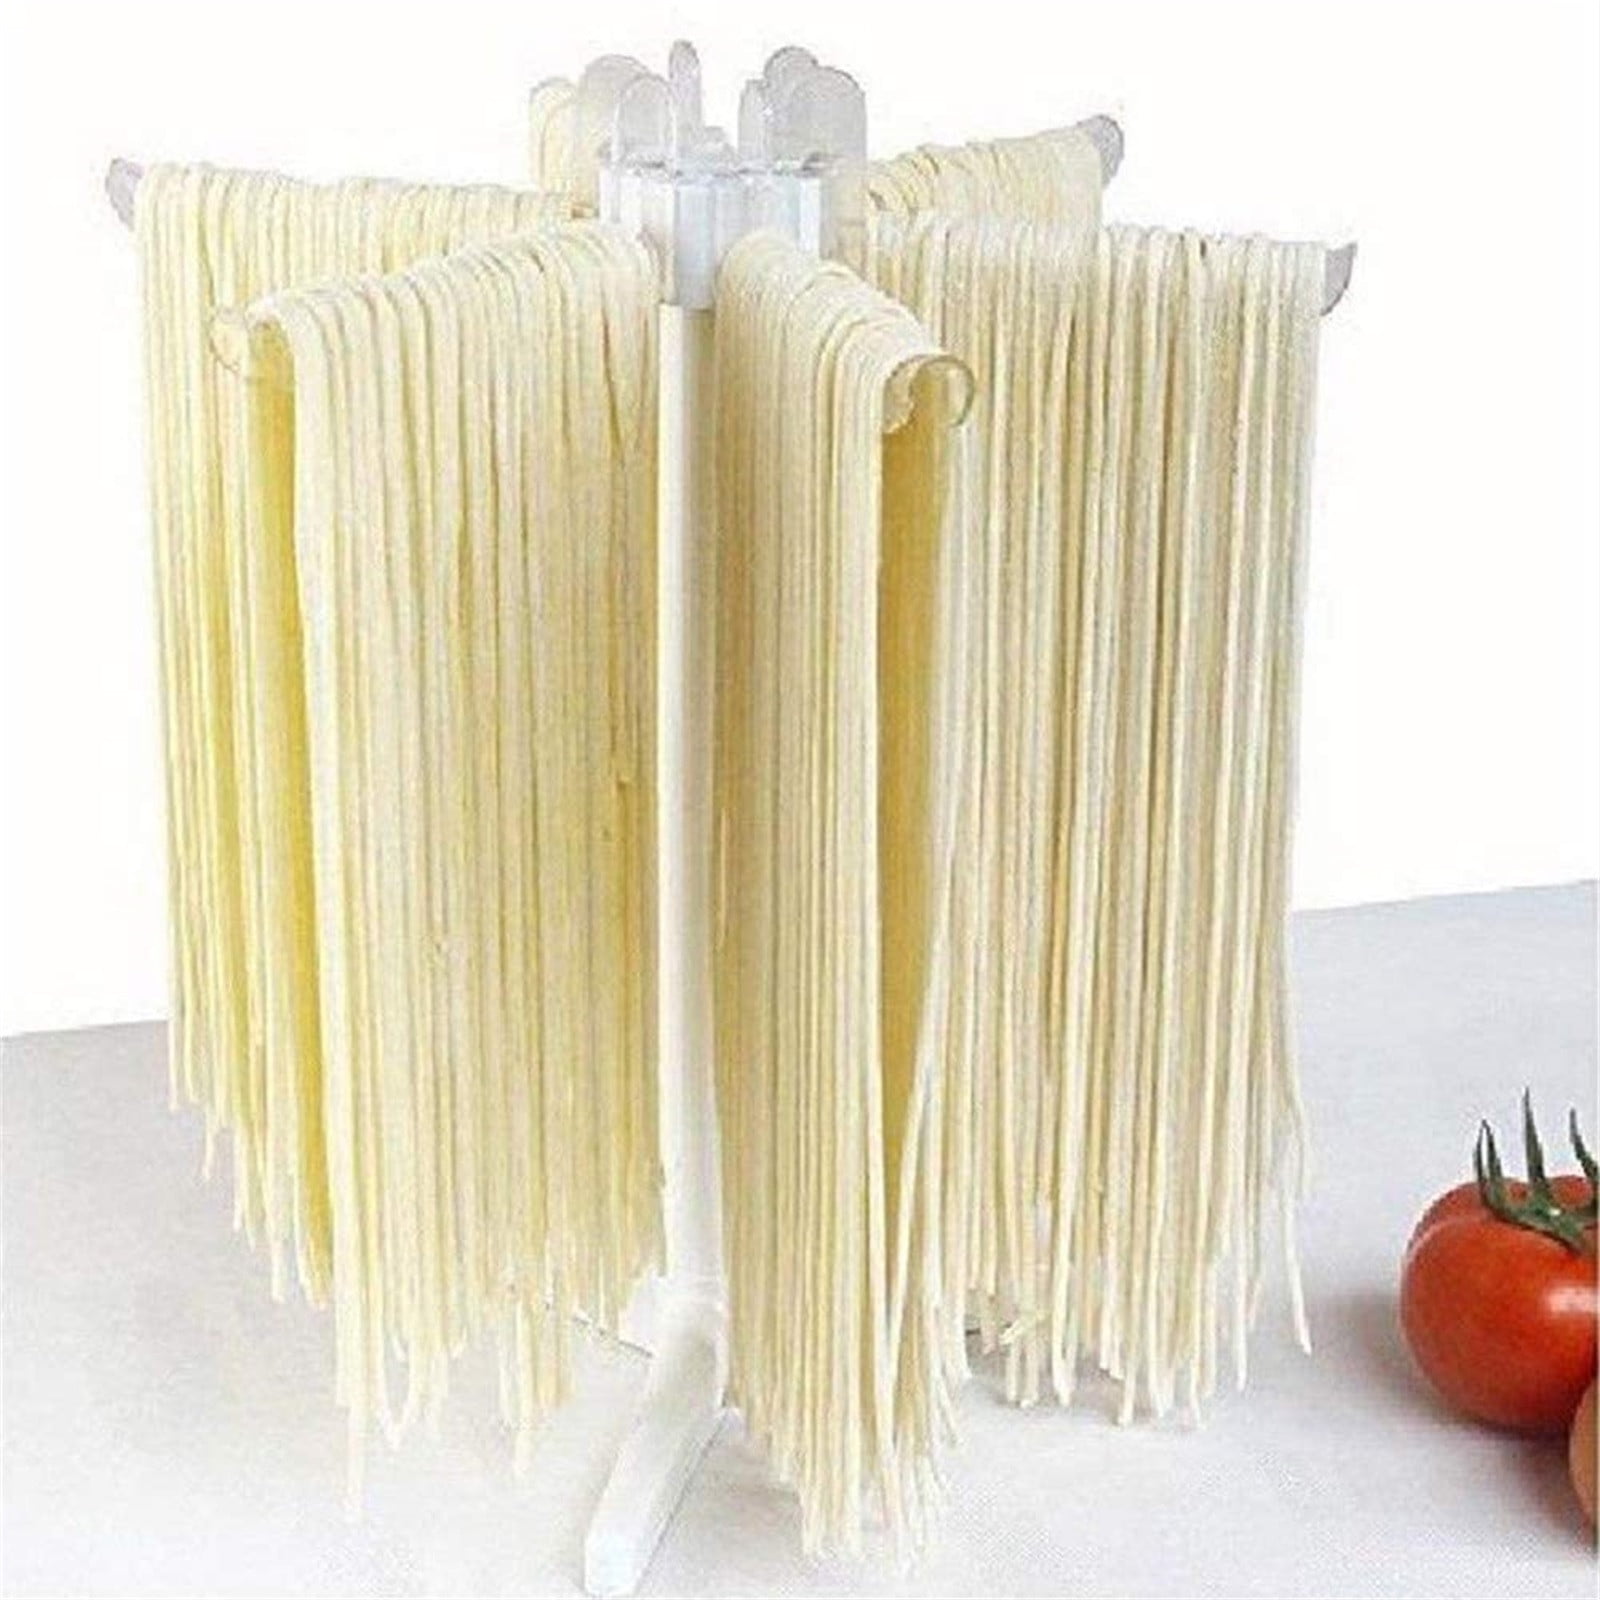 Linguine Bracket Fresh Pasta Drying Rack,Homemade Noodle Dryers Spaghetti Machine,Collapsible Fettuccine Stand with 10 Bars,ABS Vermicelli 